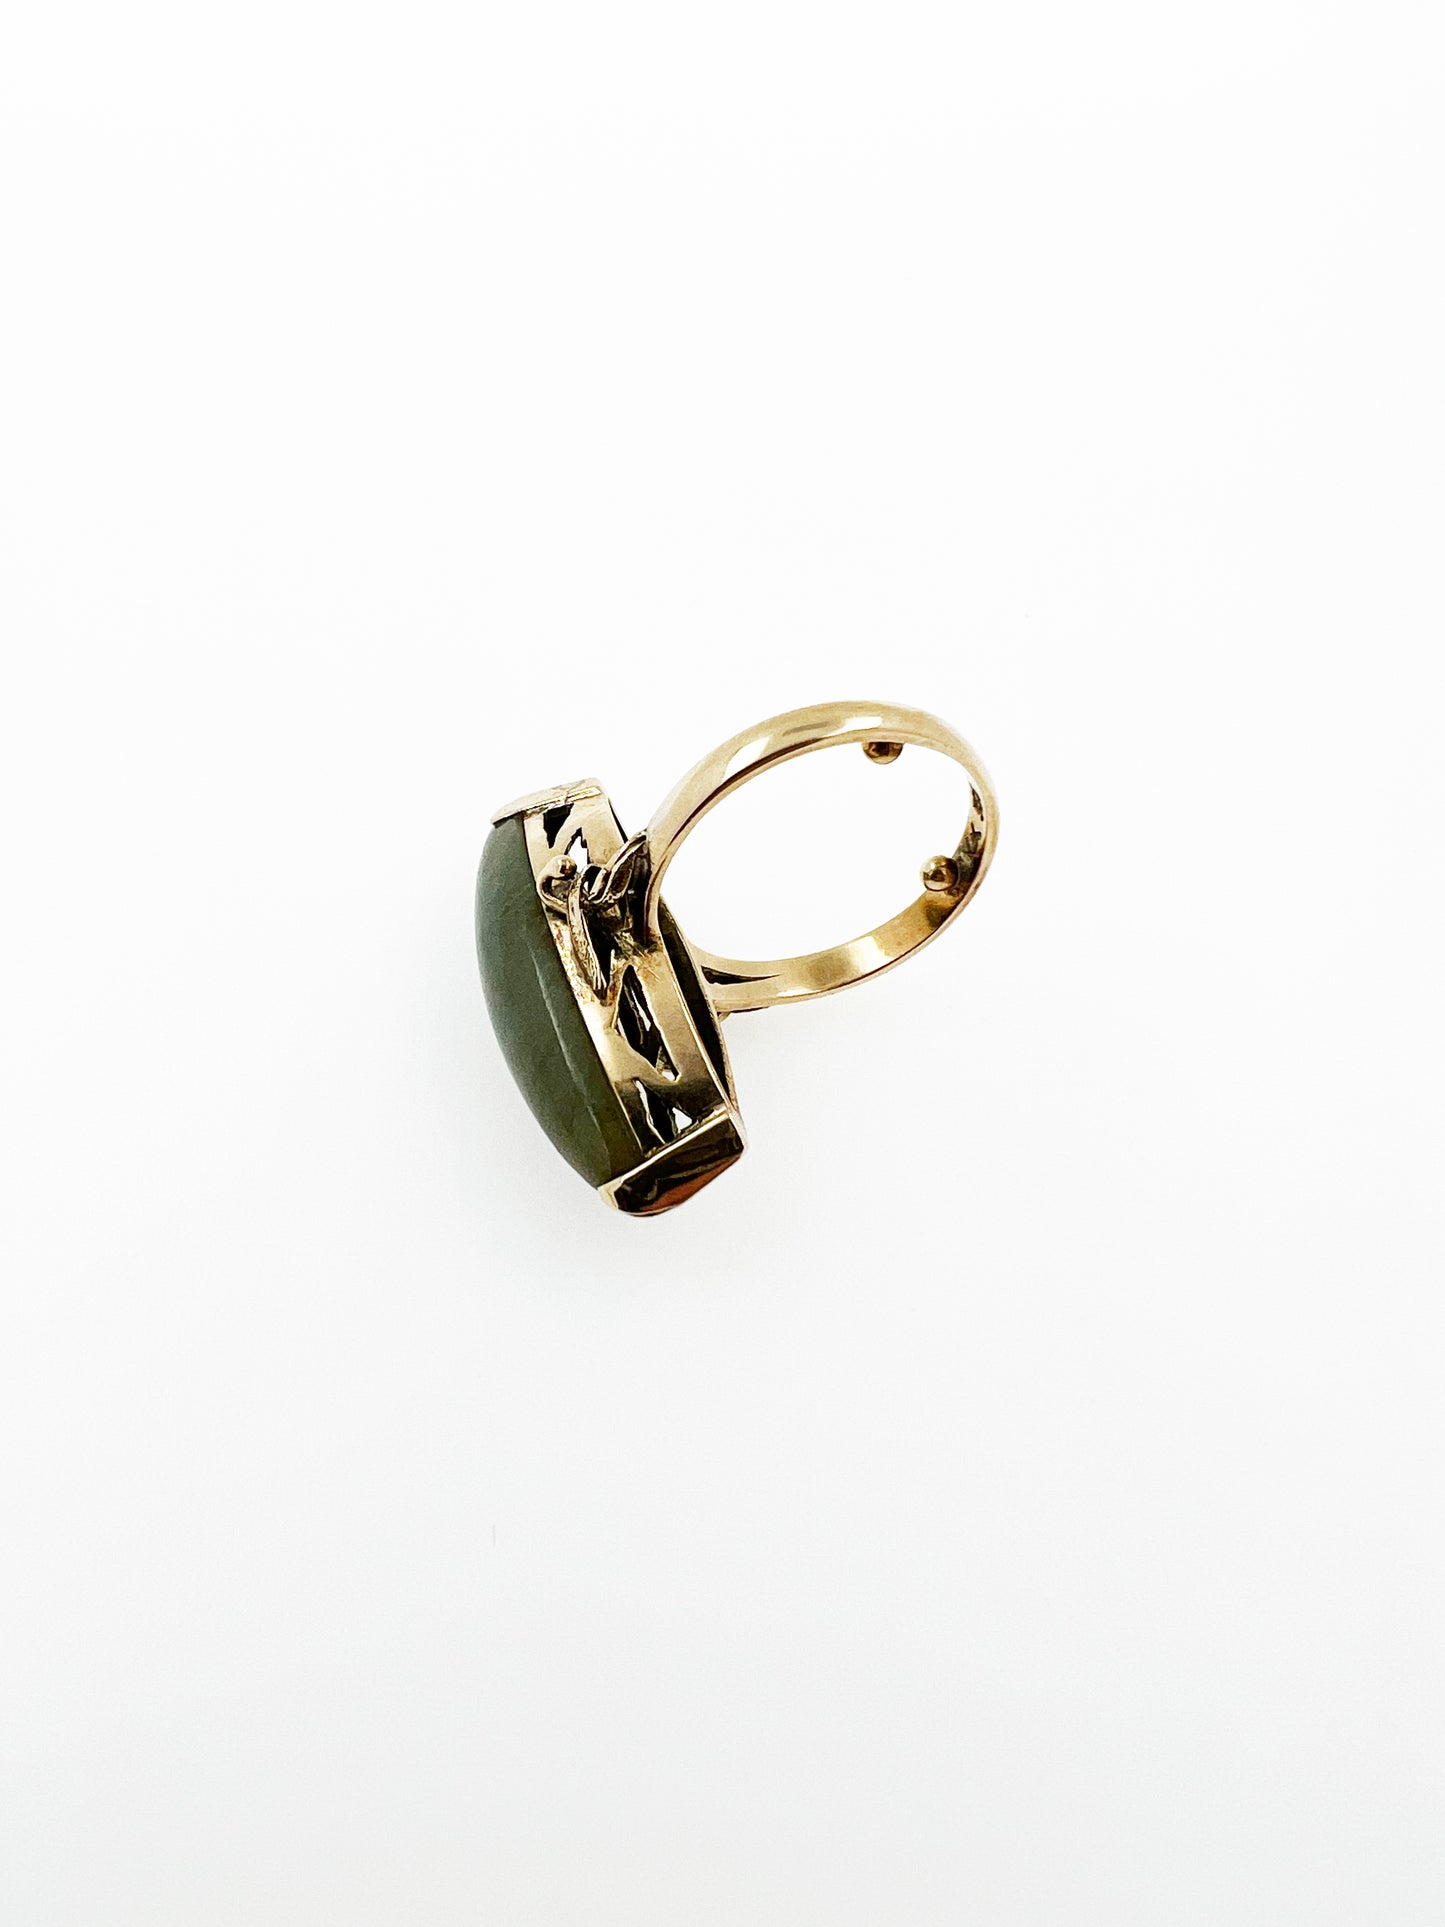 Antique Marquise Cabochon Jade Ring in 14k Yellow Gold